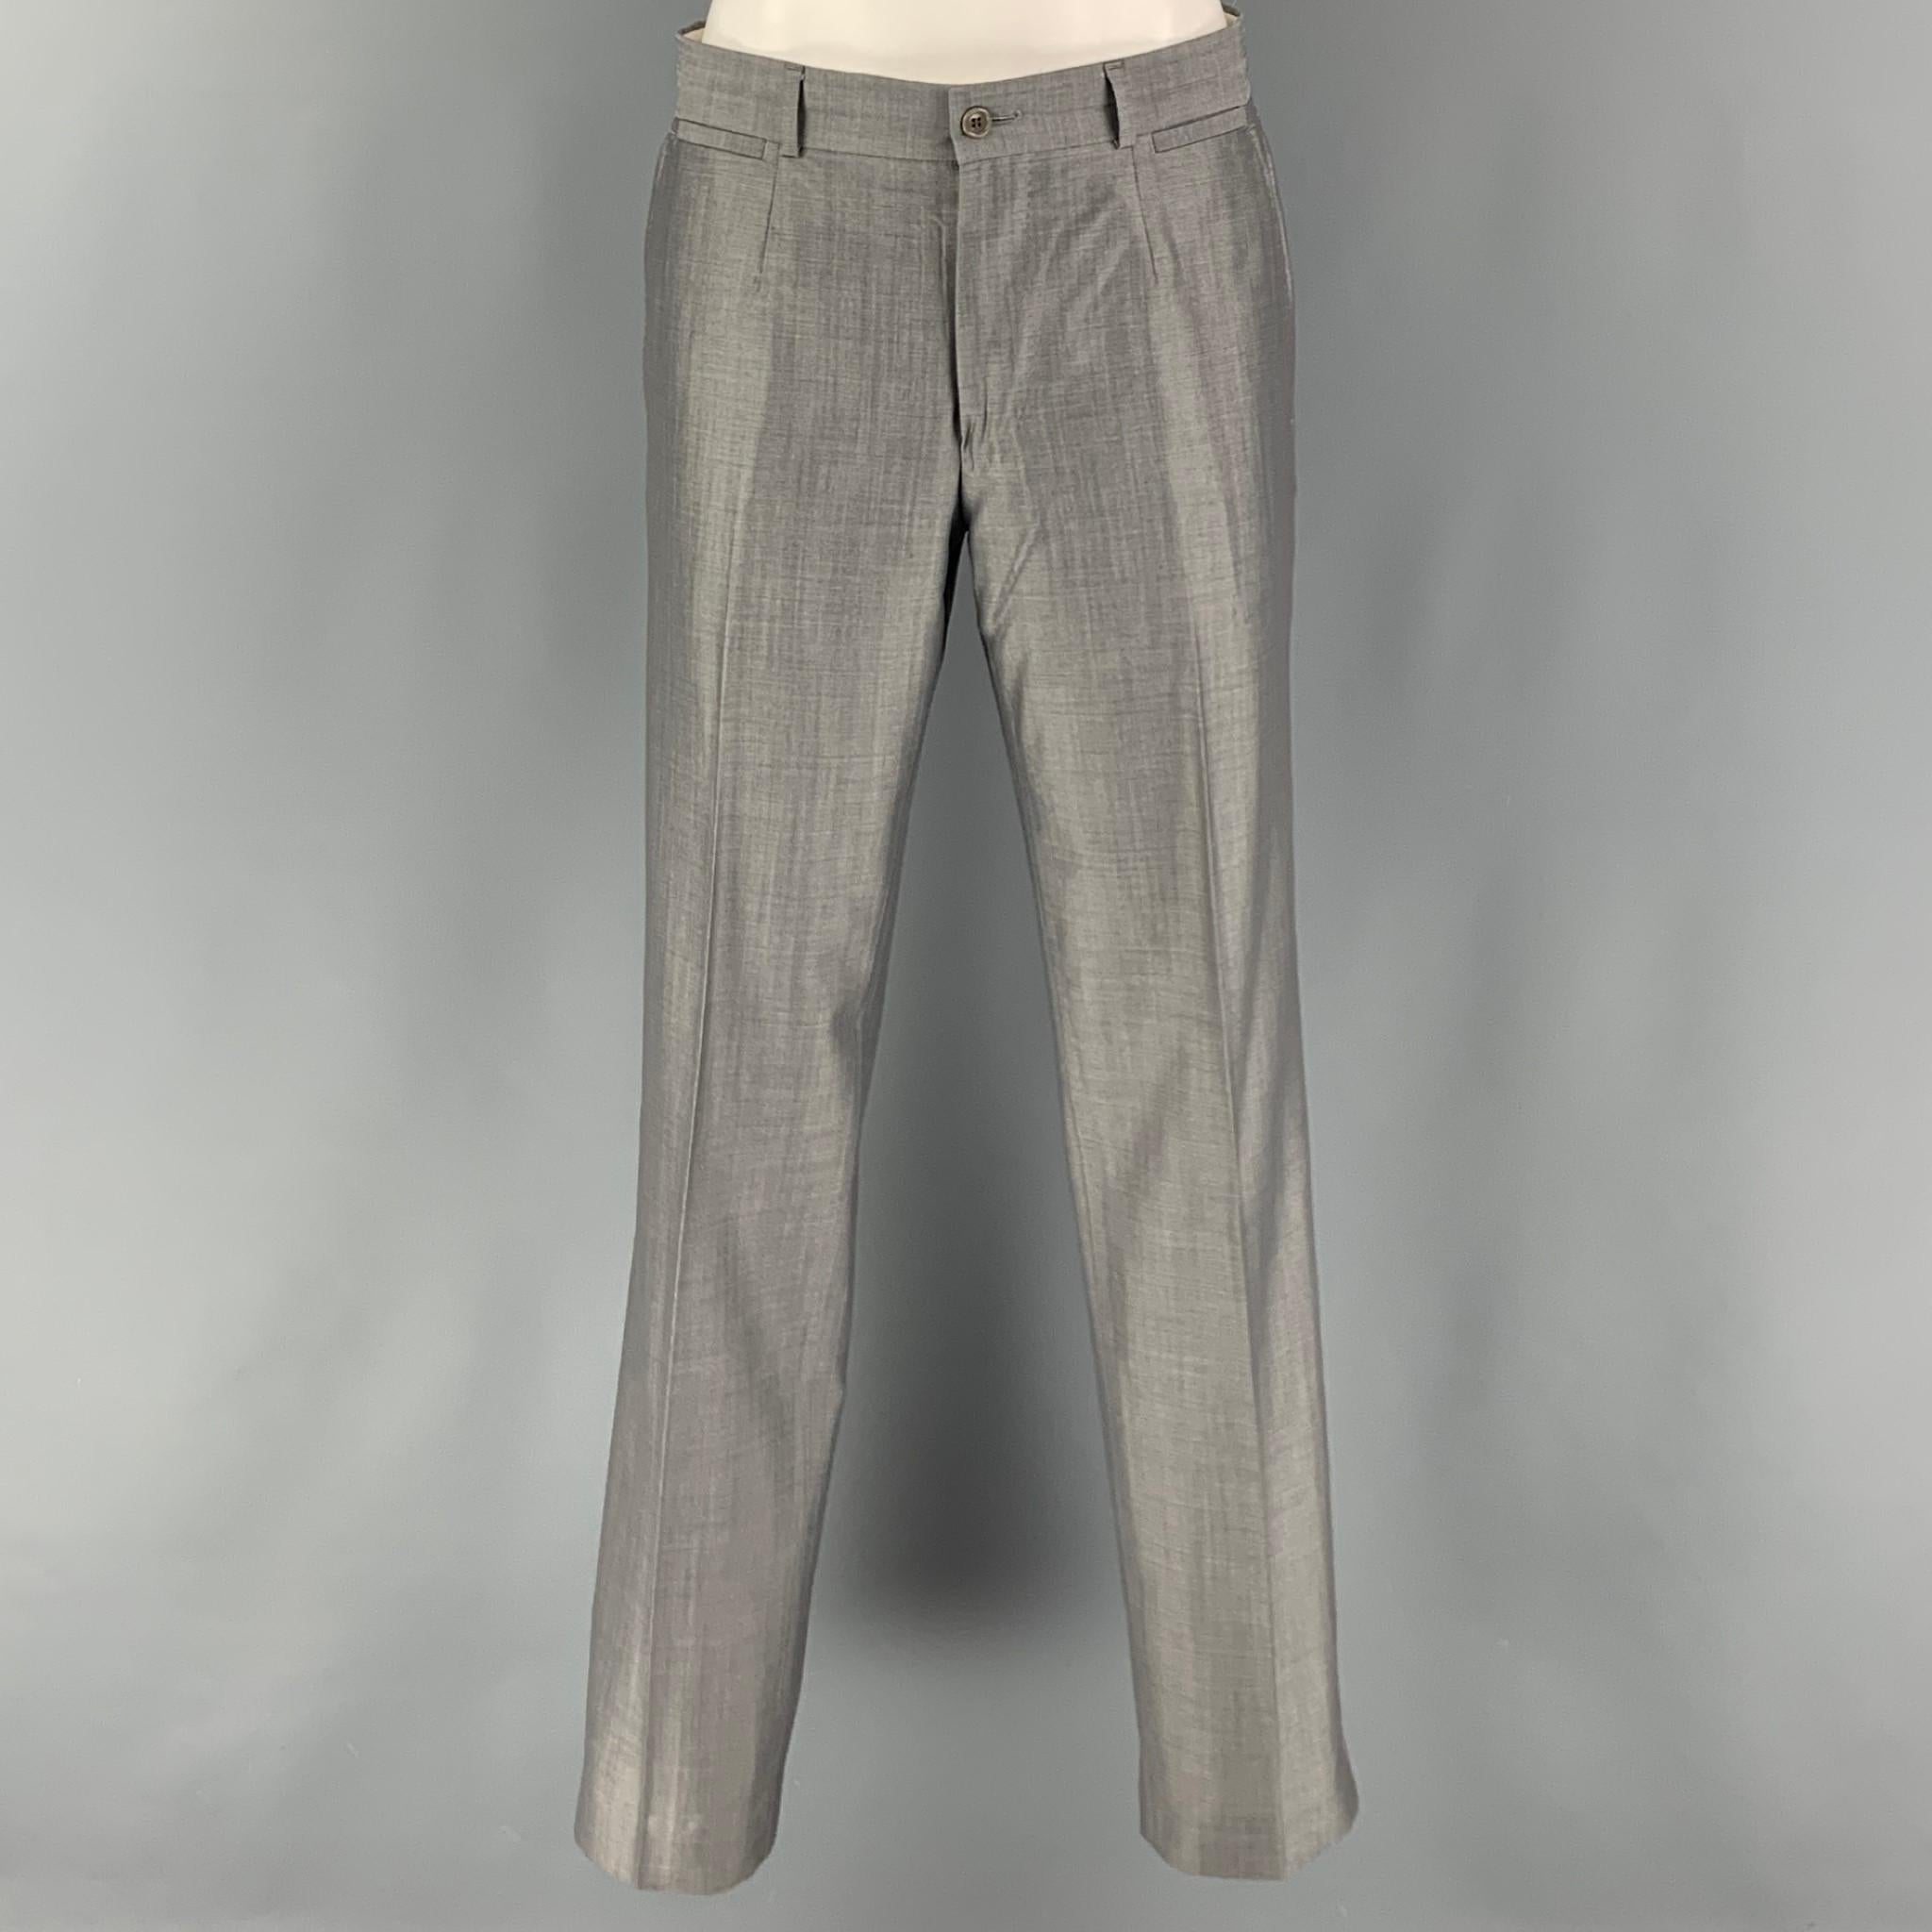 SPONTINI Size 36 Grey Shimmery Wool Silk Single Breasted 28 30 Suit 4